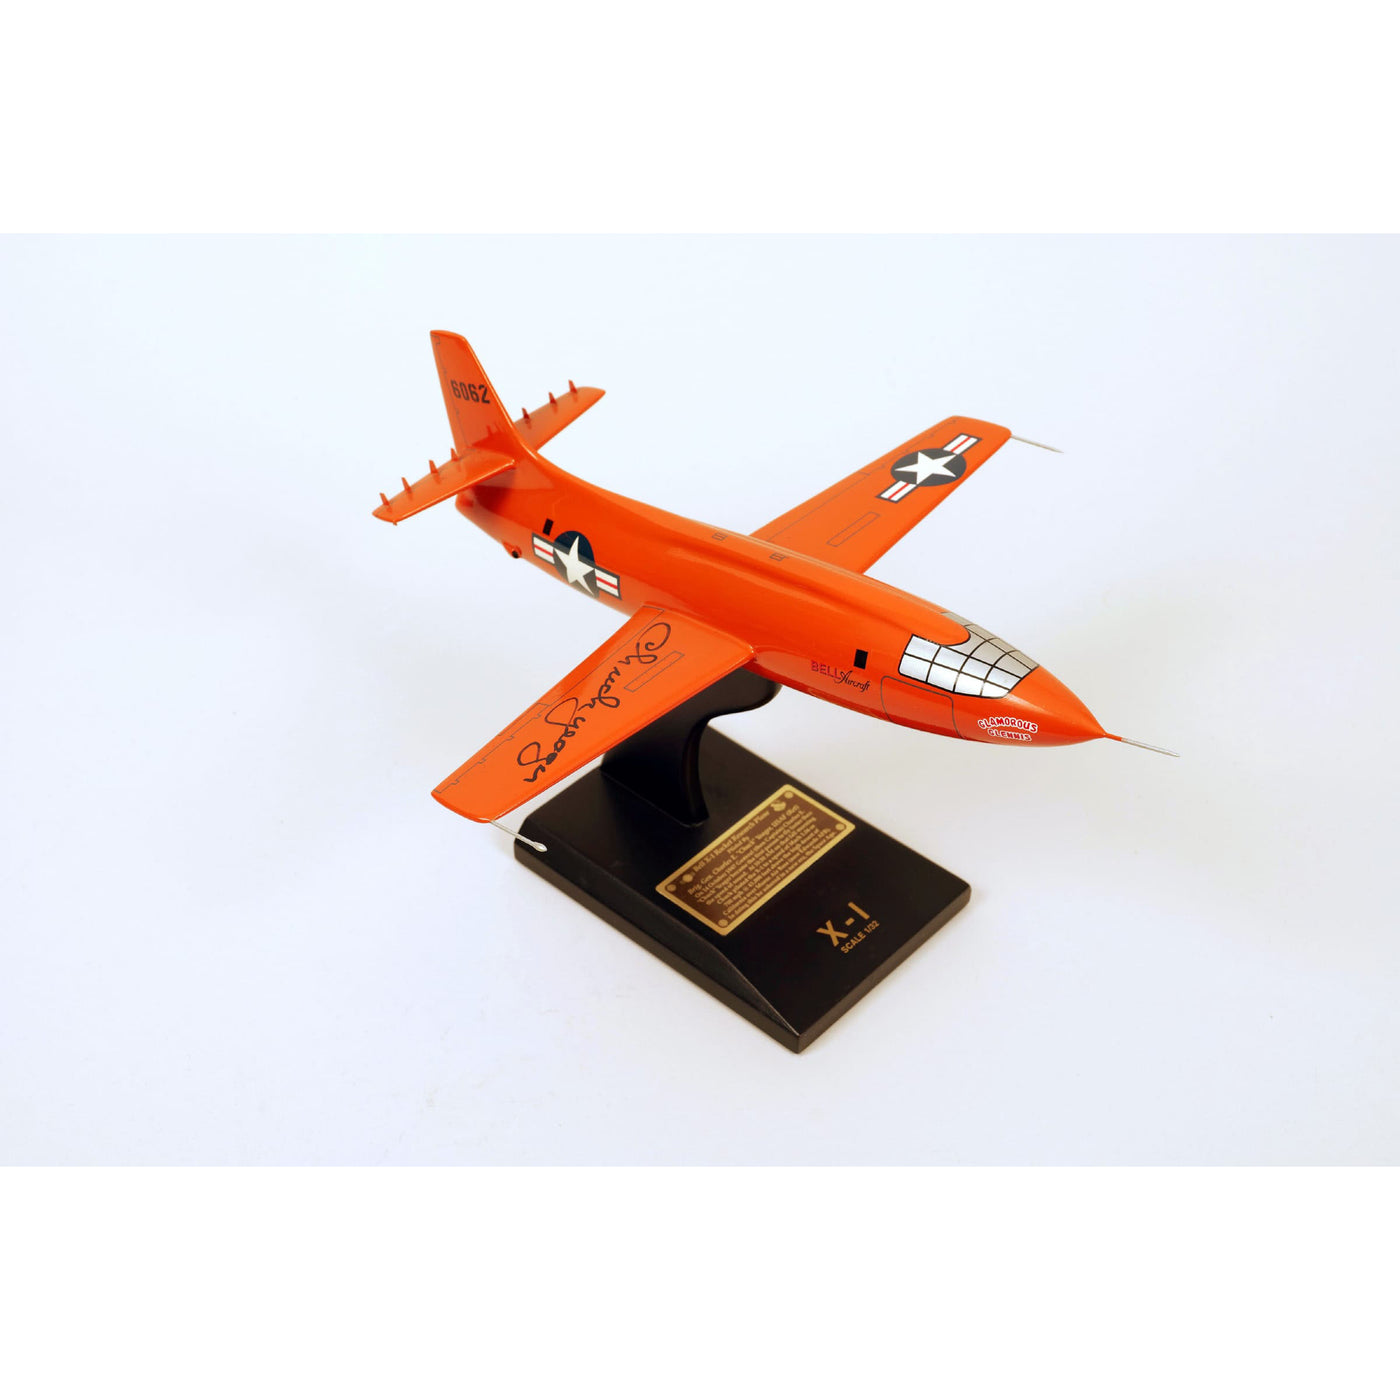 Chuck Yeager – signed X-1 model